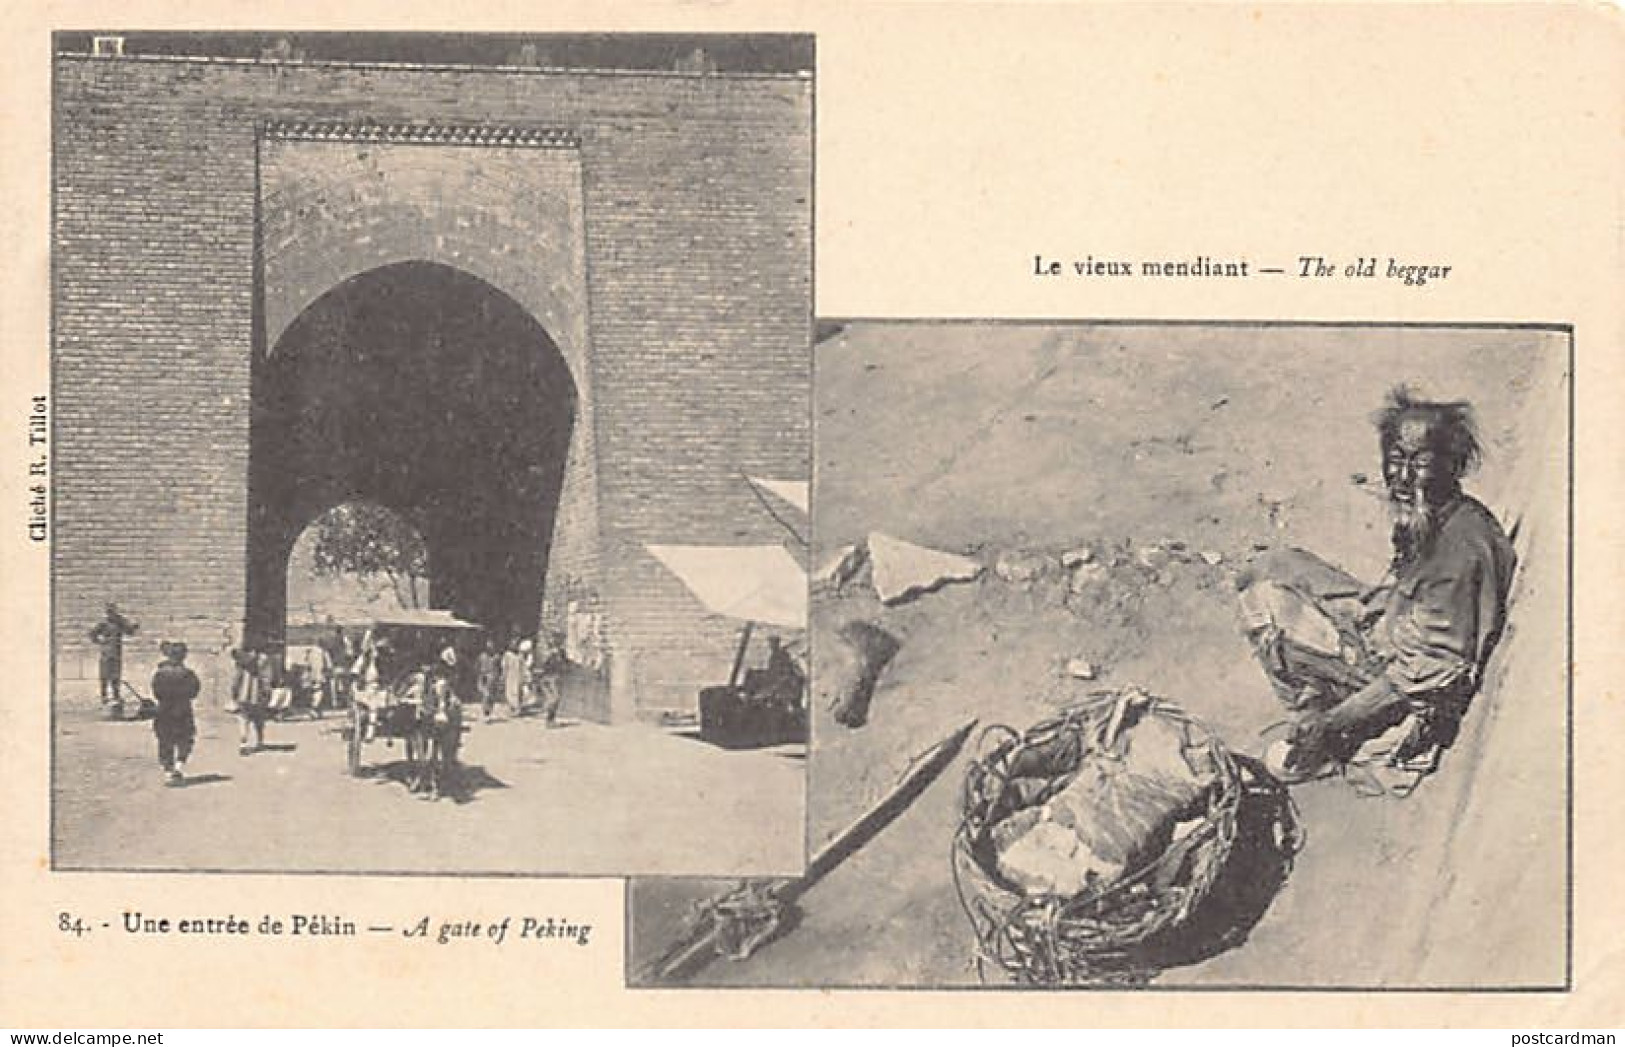 China - BEIJING - A Gate - The Old Beggar - Publ. R. Tillot 84 - Chine